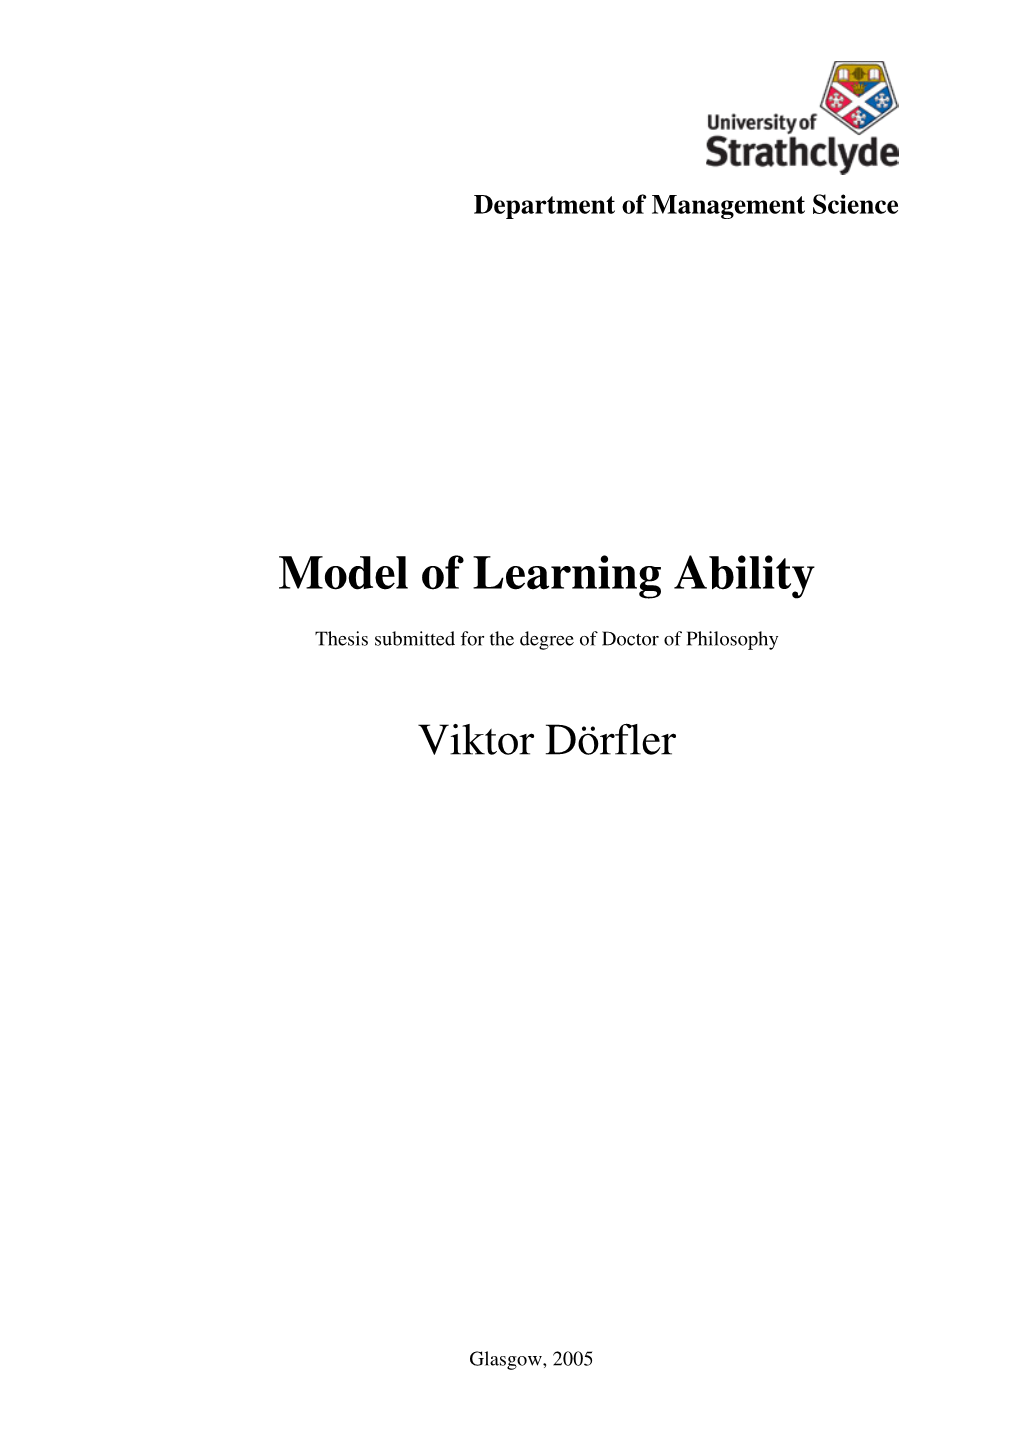 Model of Learning Ability